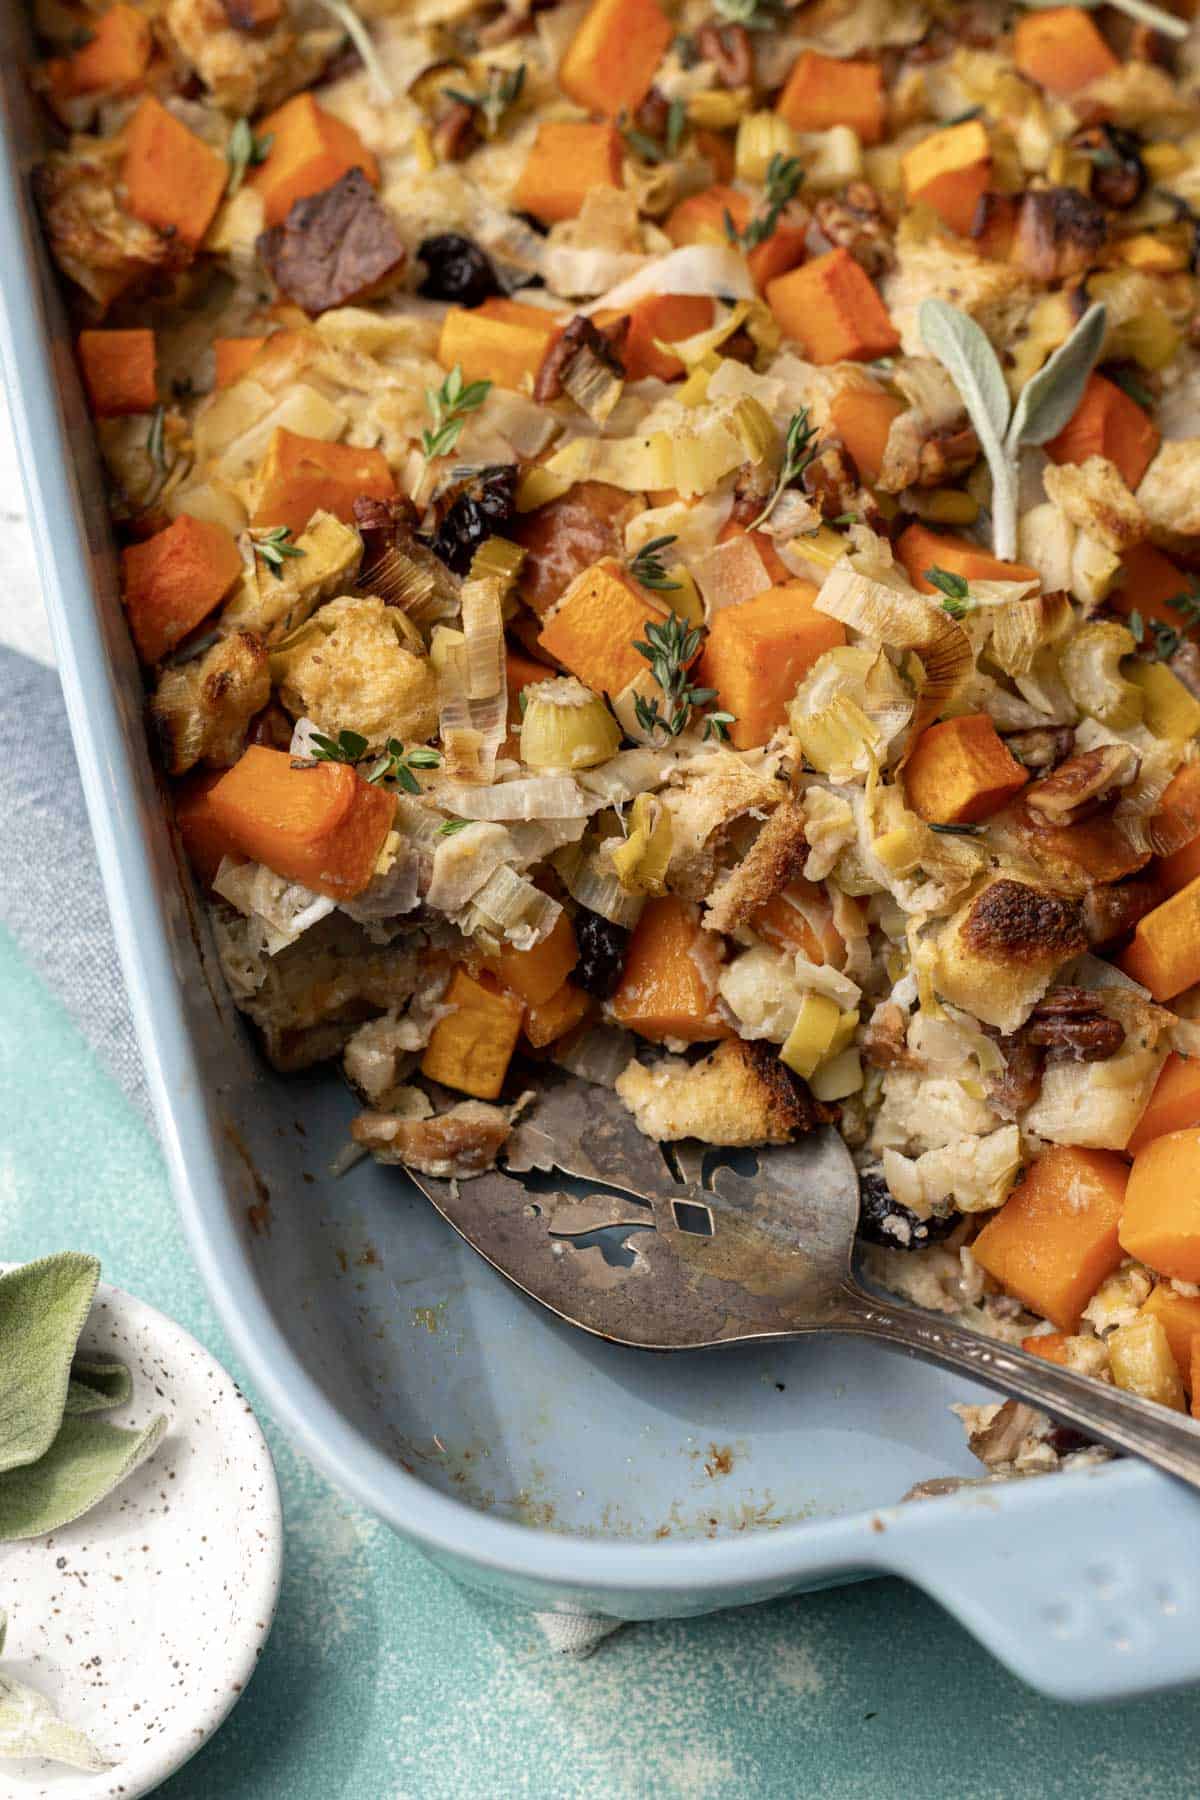 Butternut squash and apple stuffing in a baking dish with a serving spatula and side of fresh sage.